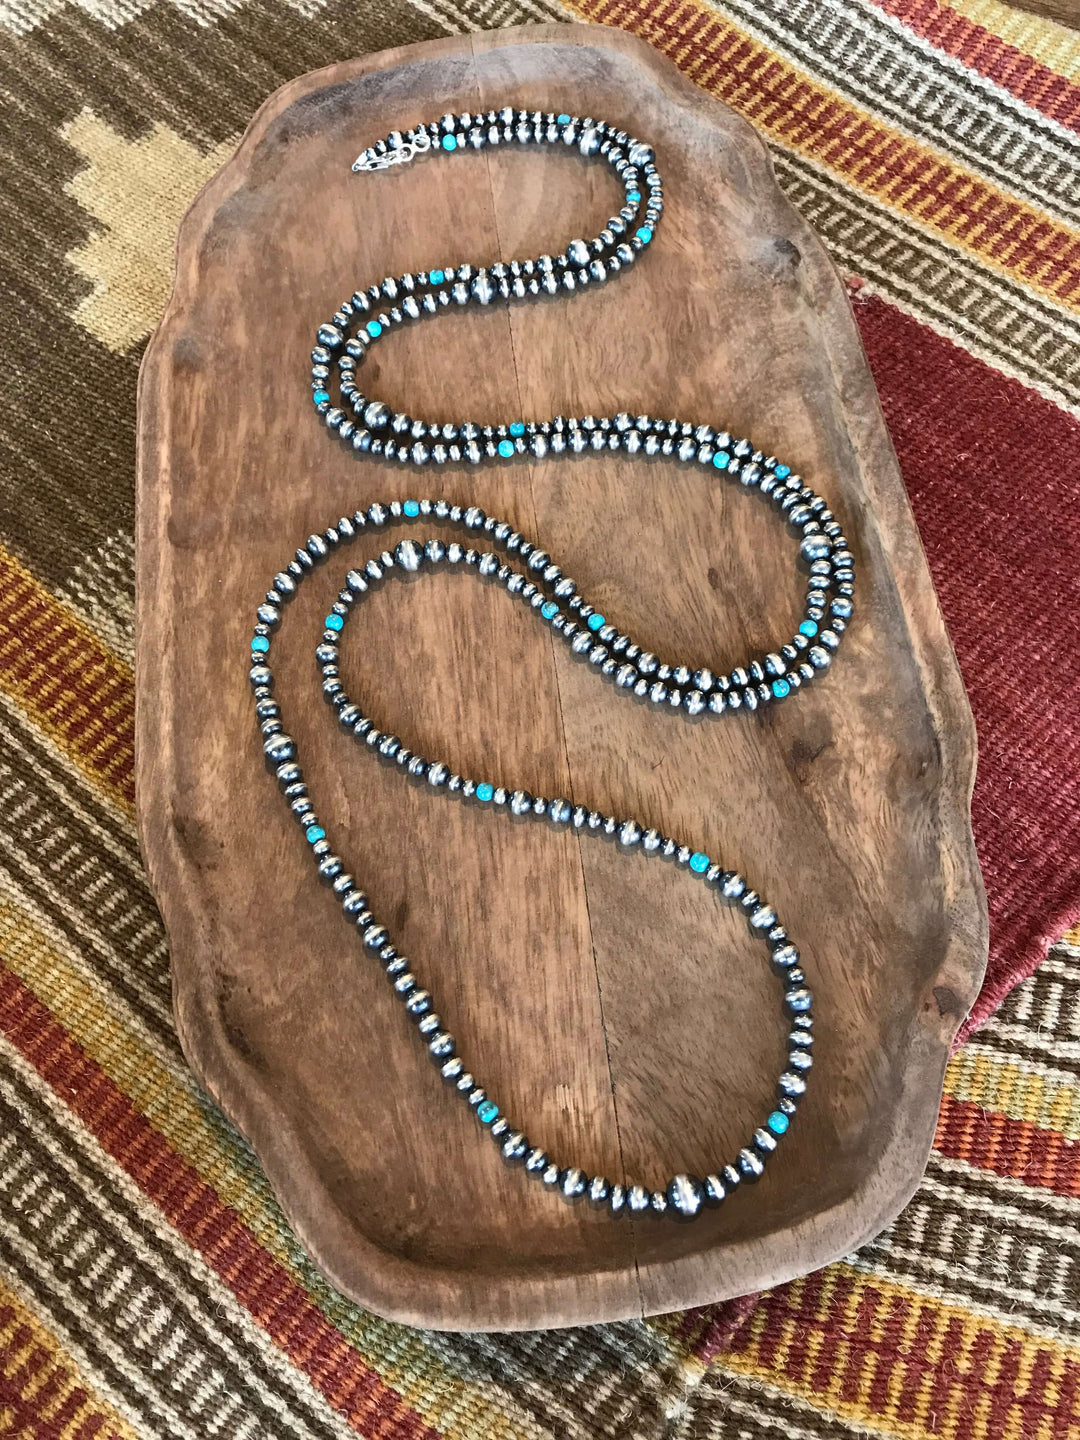 The Tulare Necklace, 60"-Necklaces-Calli Co., Turquoise and Silver Jewelry, Native American Handmade, Zuni Tribe, Navajo Tribe, Brock Texas